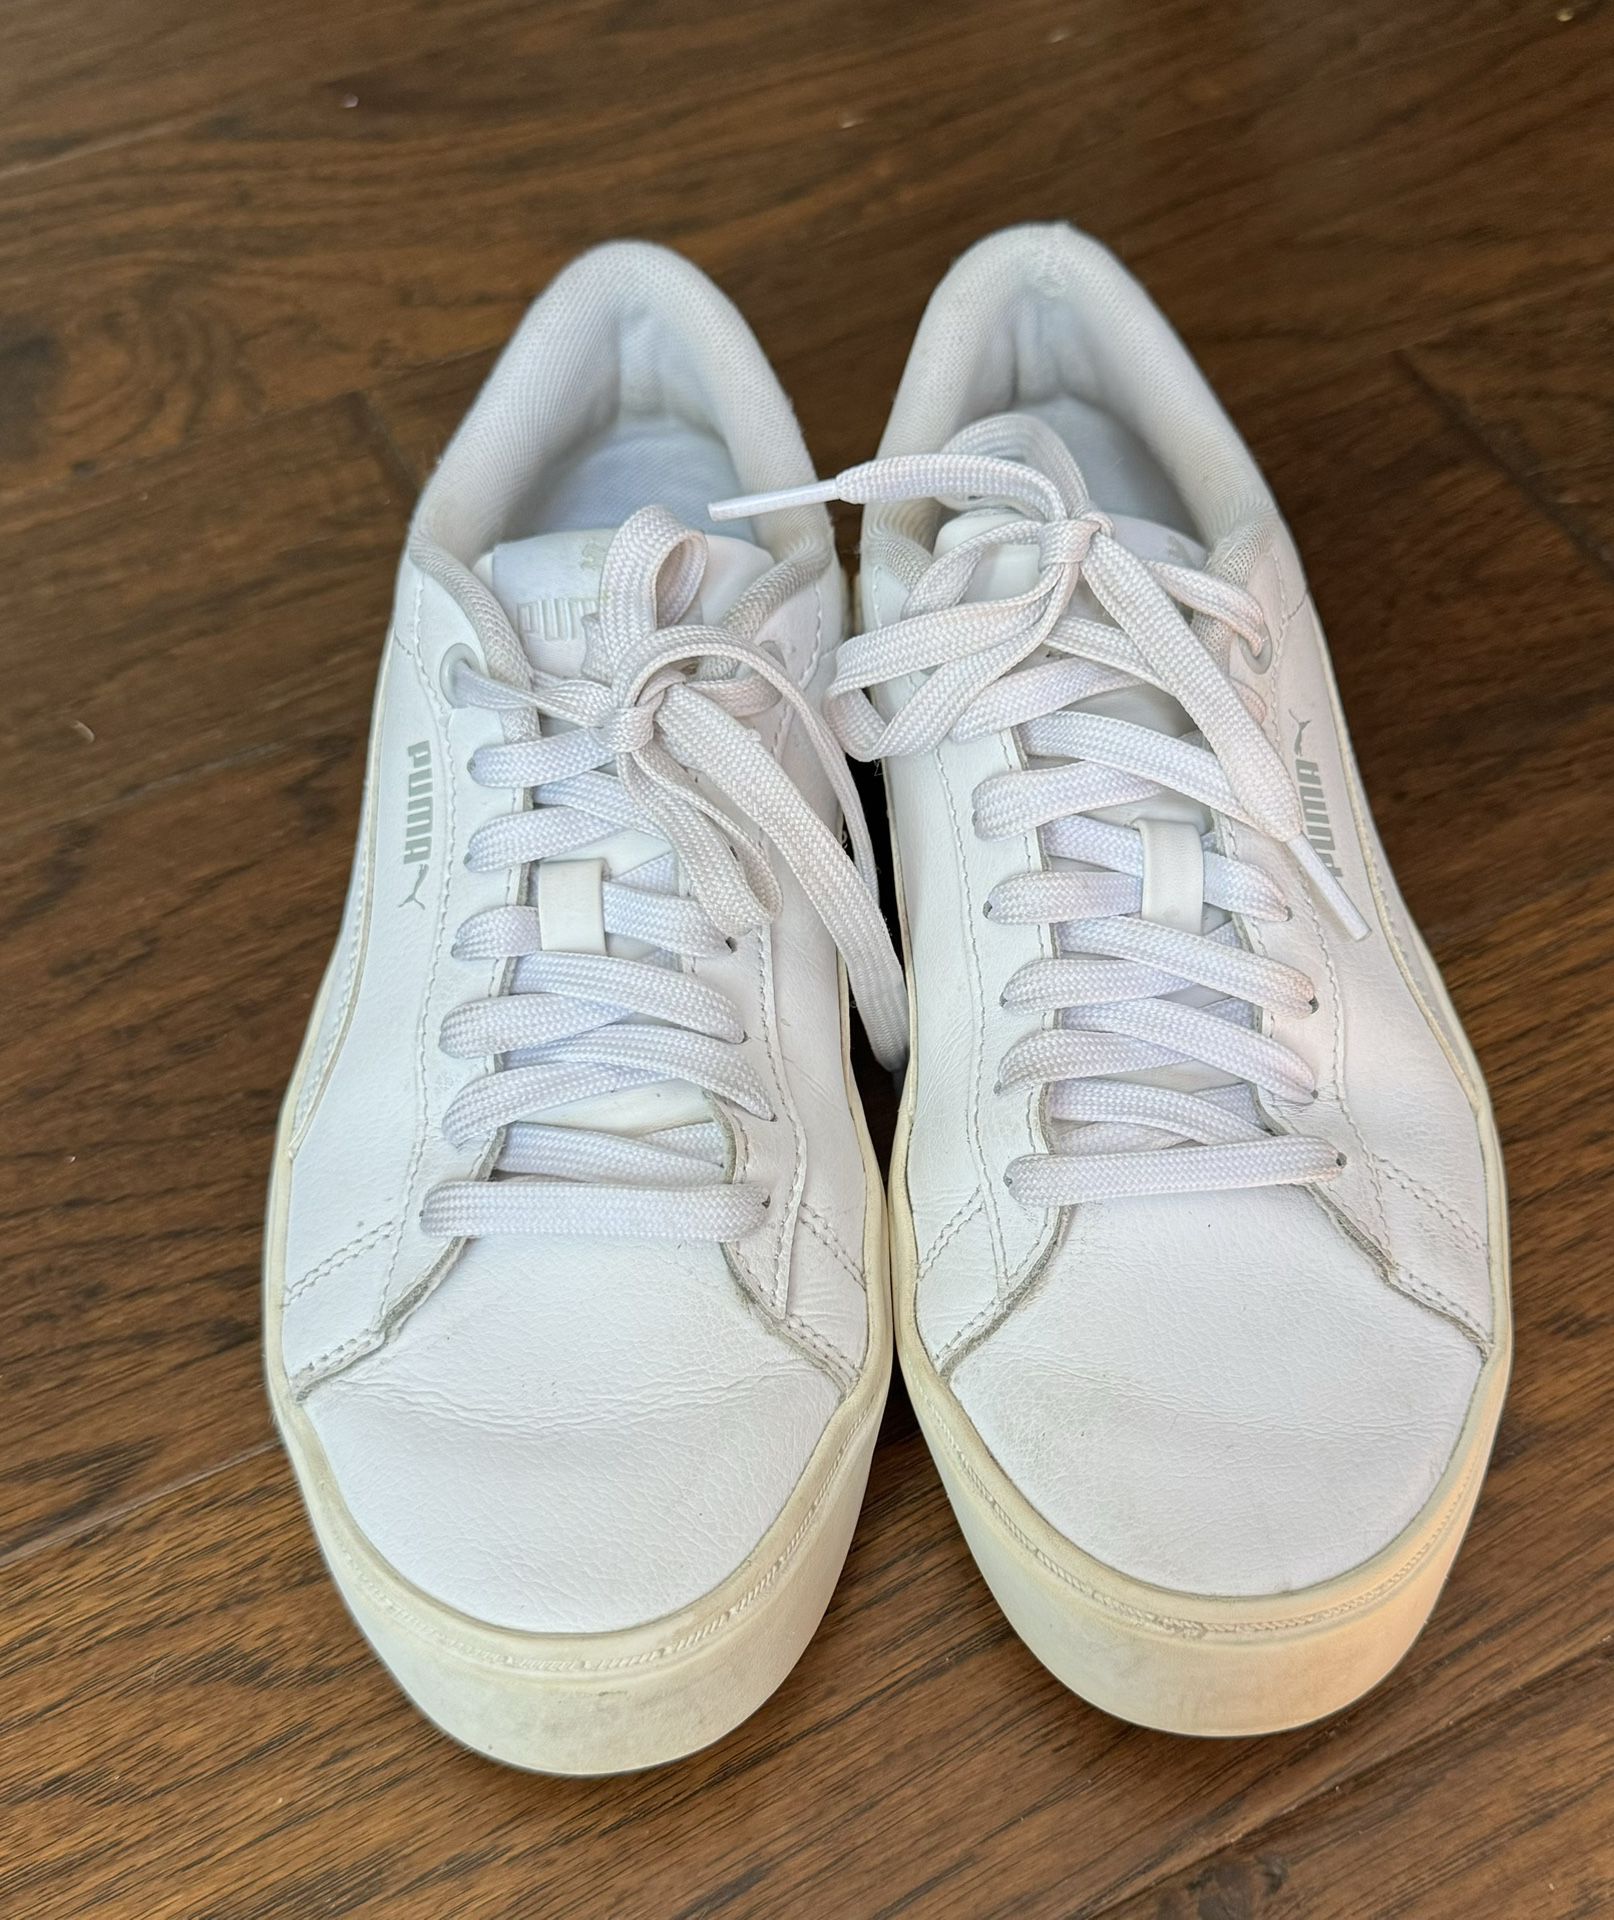 Woman’s Leather Puma Sneakers